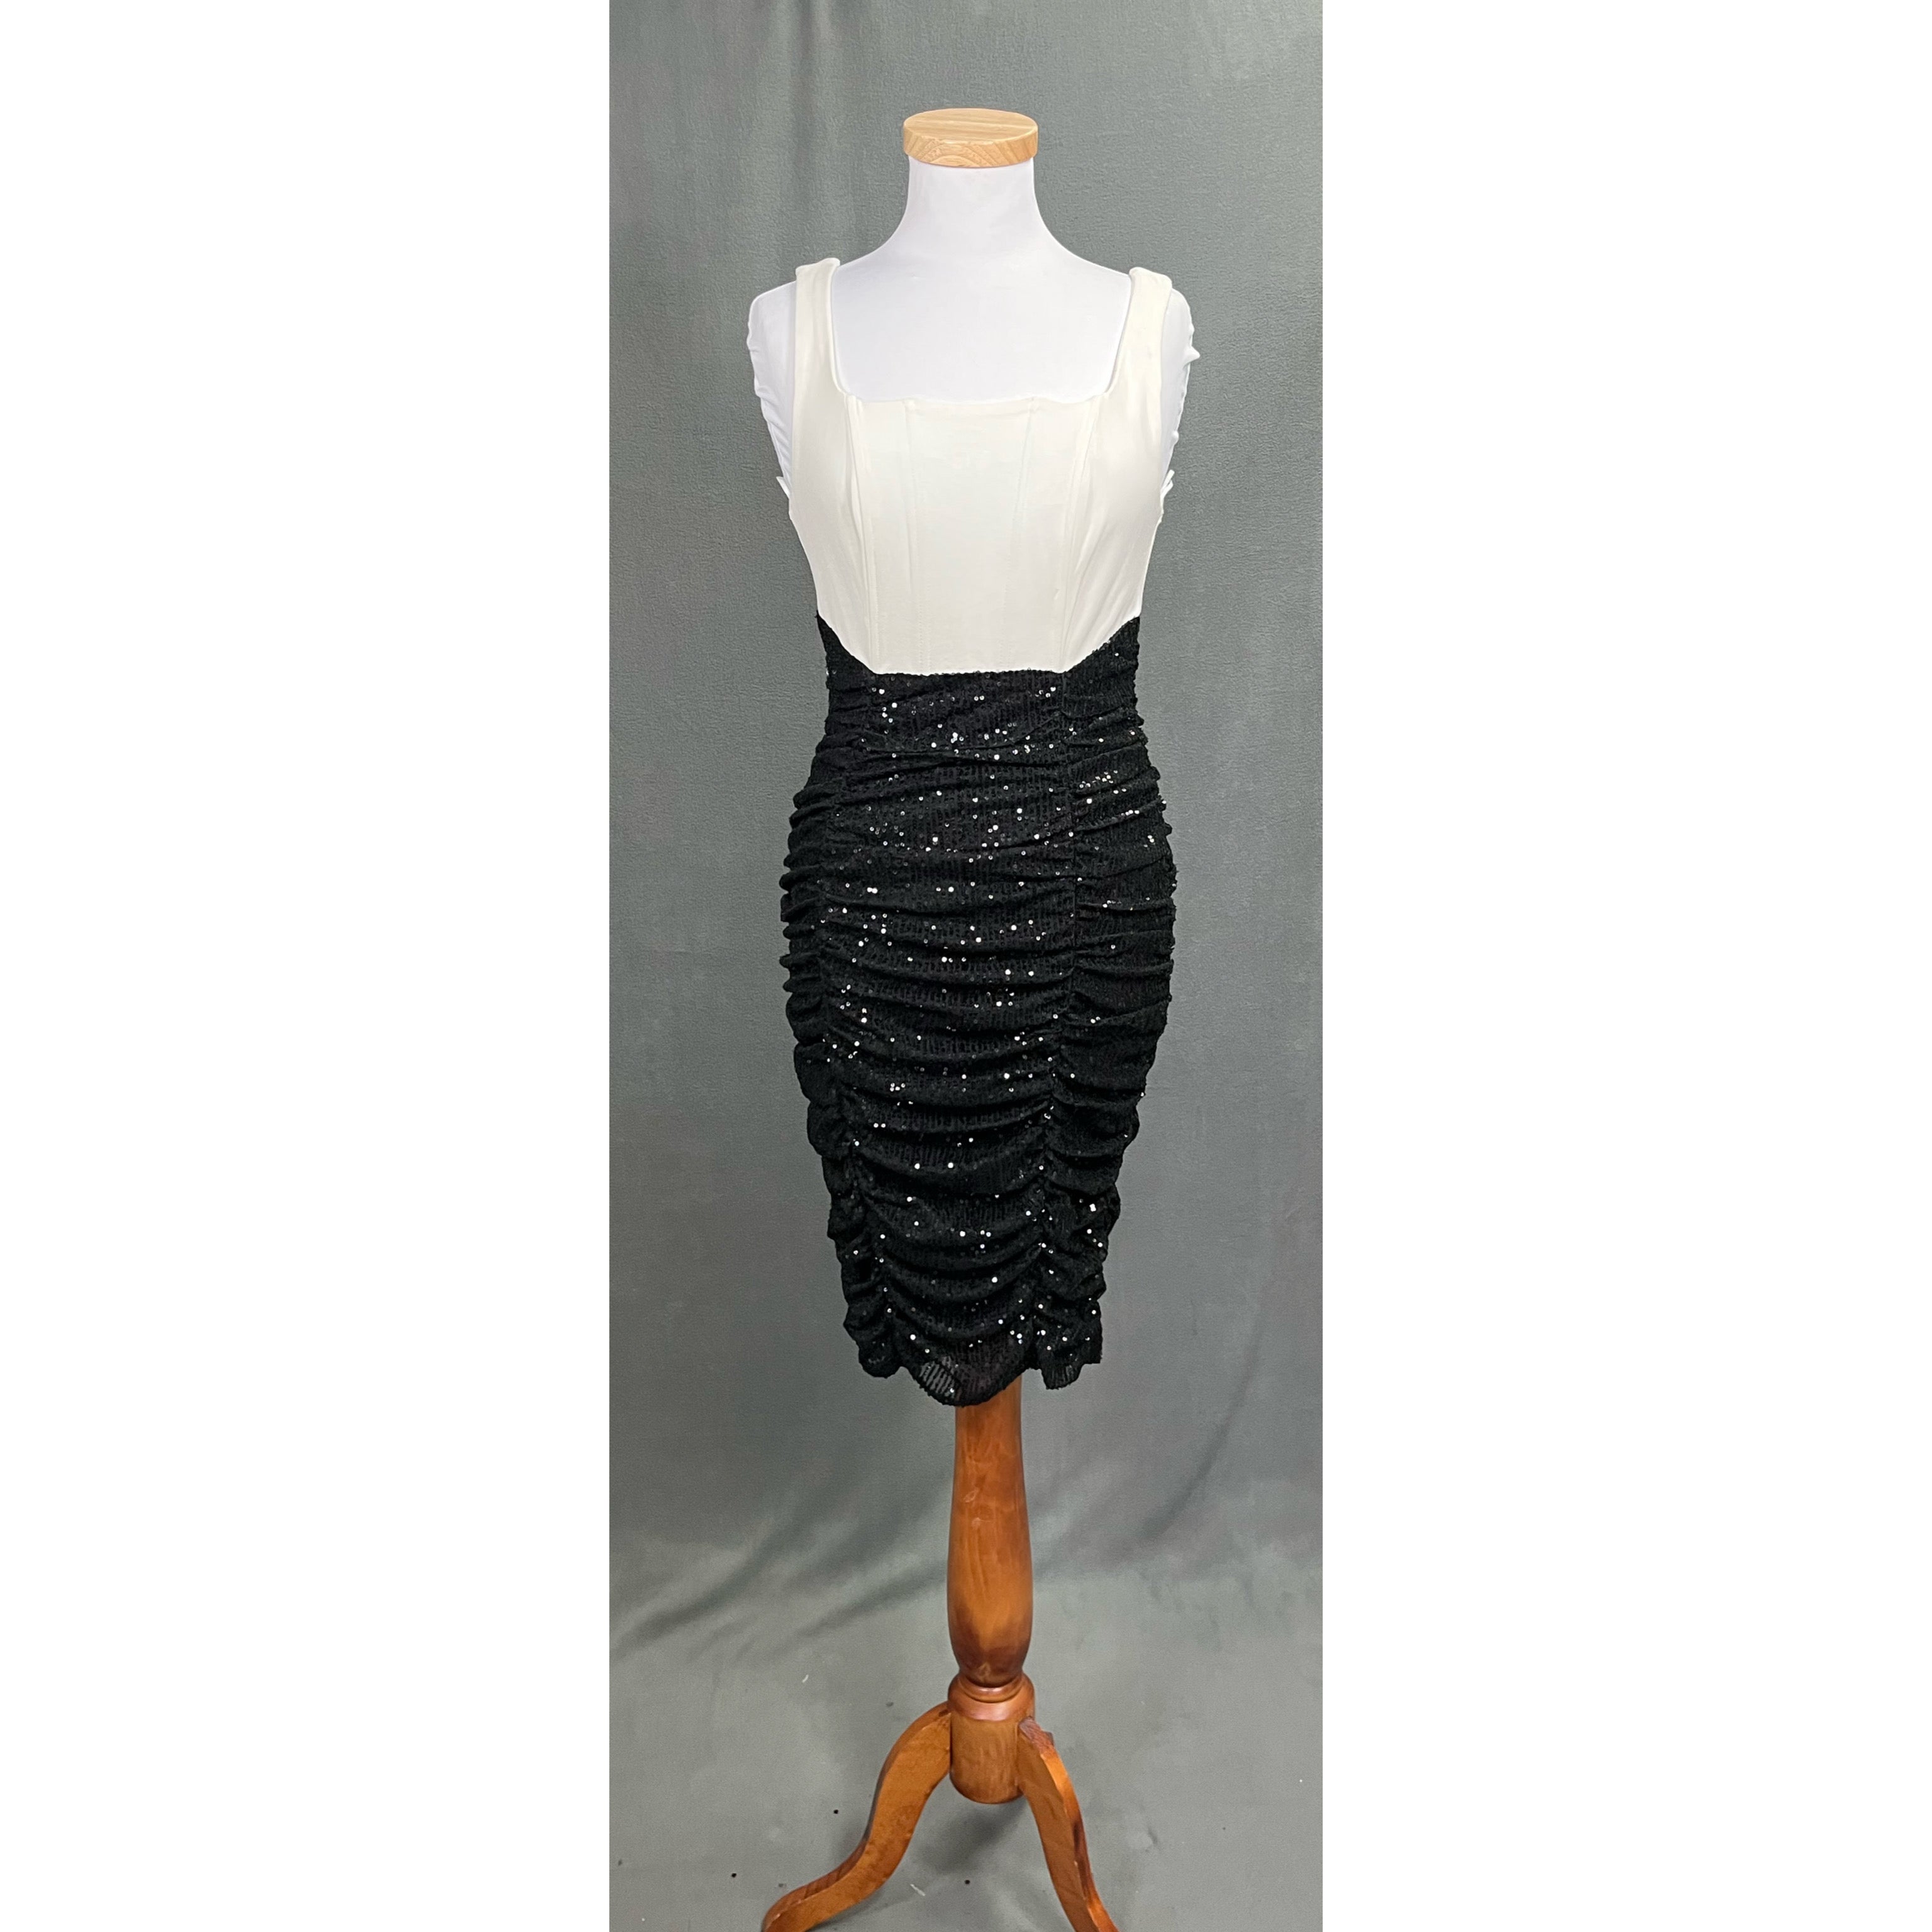 Cefian ivory and black dress, sizes M, and L, NEW WITH TAGS!